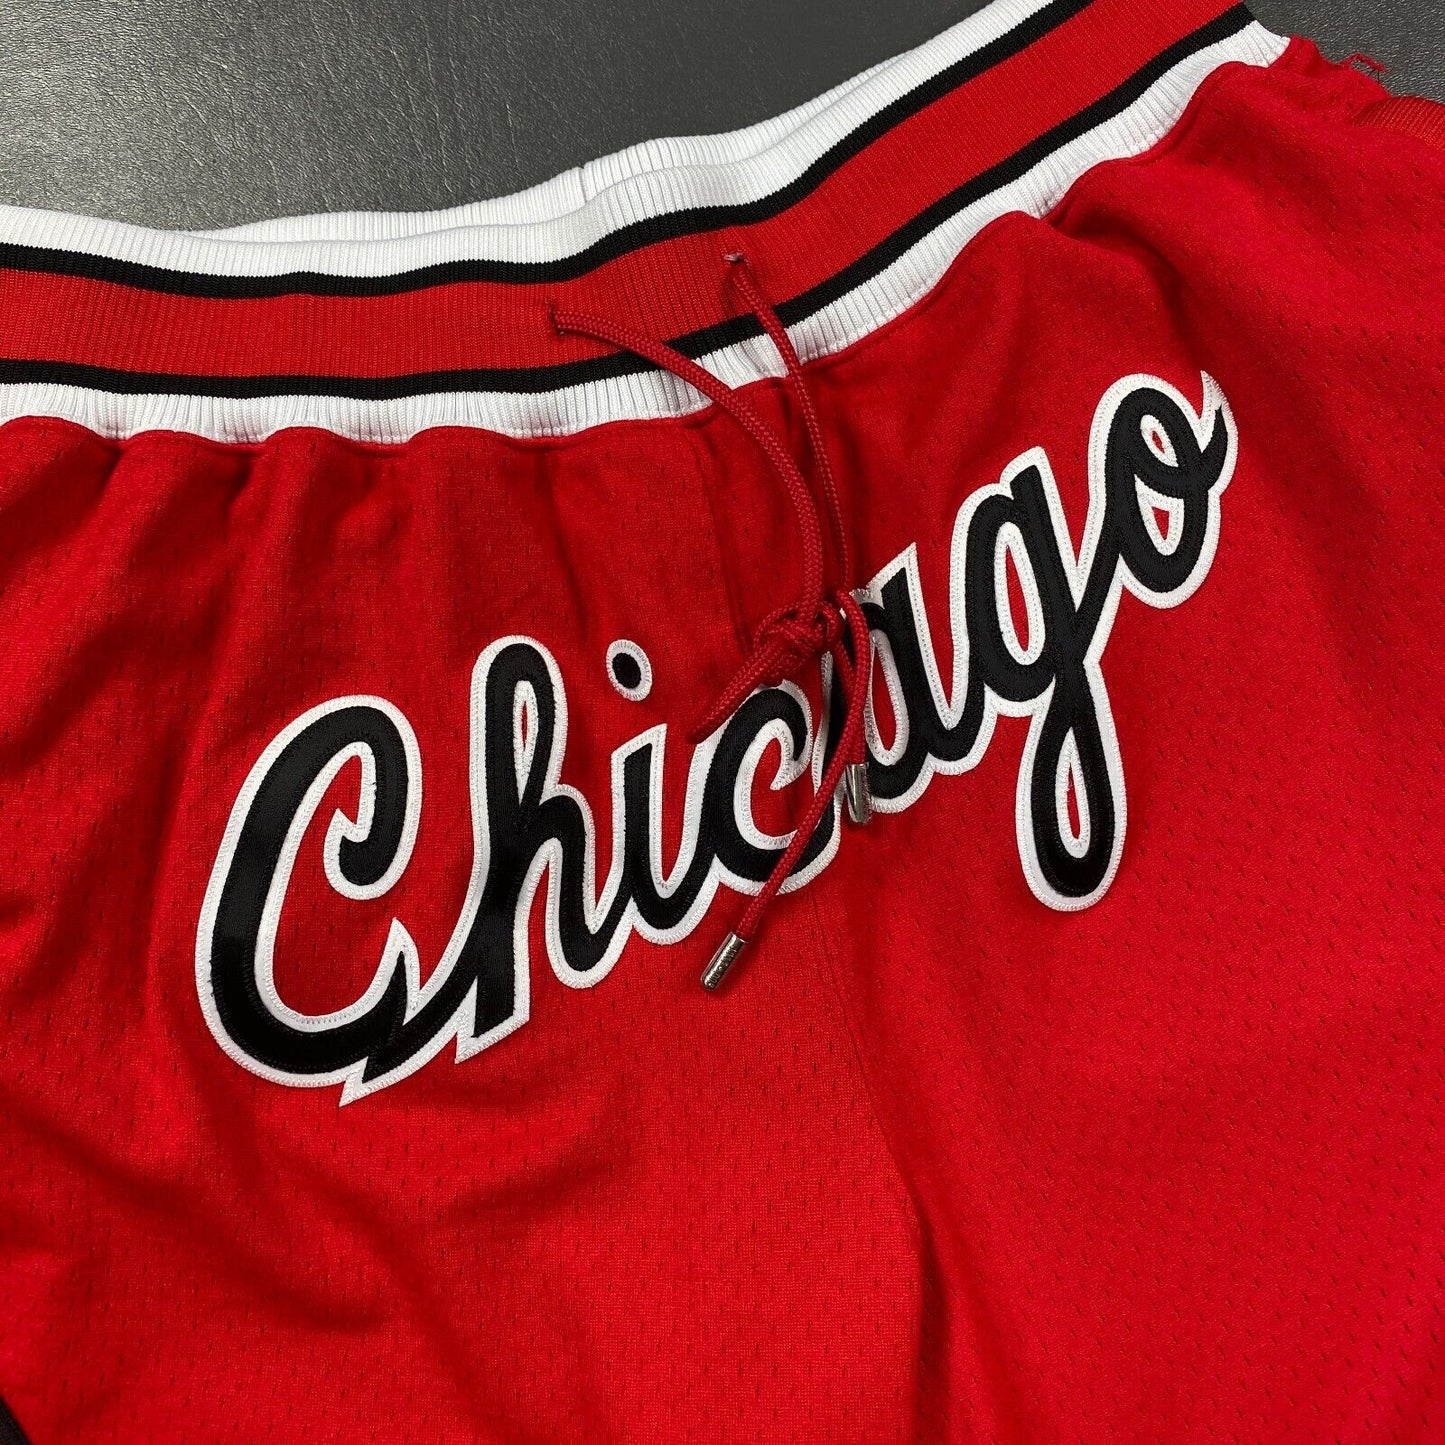 100% Authentic Just Don 96 97 Chicago Bulls Mitchell Ness Shorts Size L 44 Mens